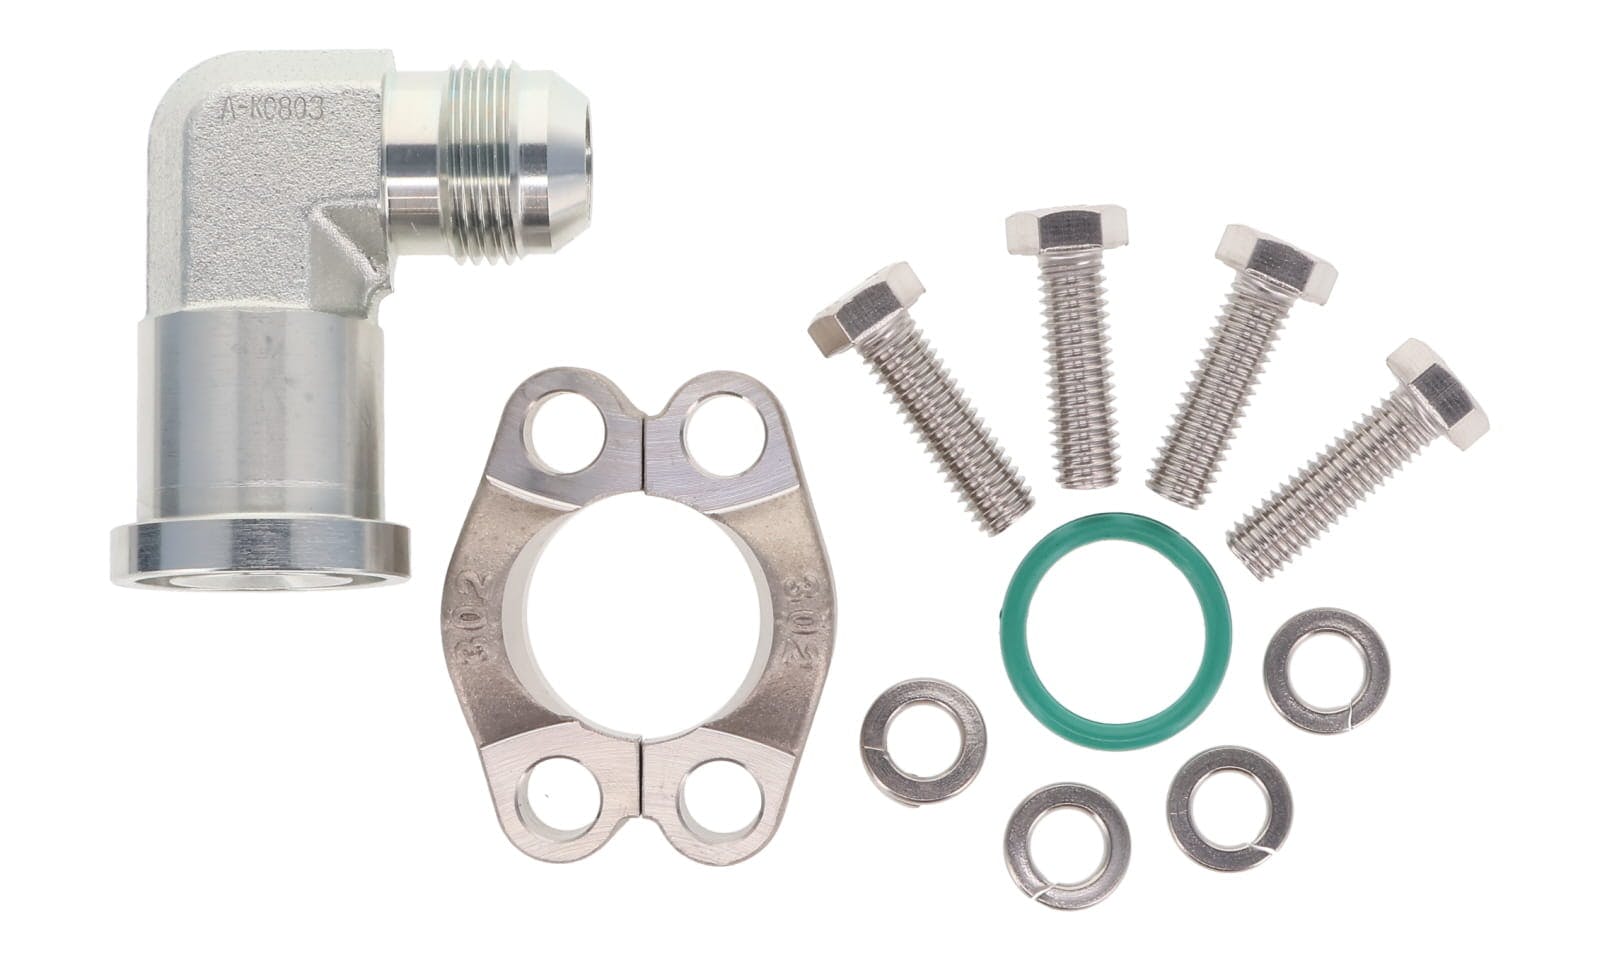 Flange Adapters (Fittings)